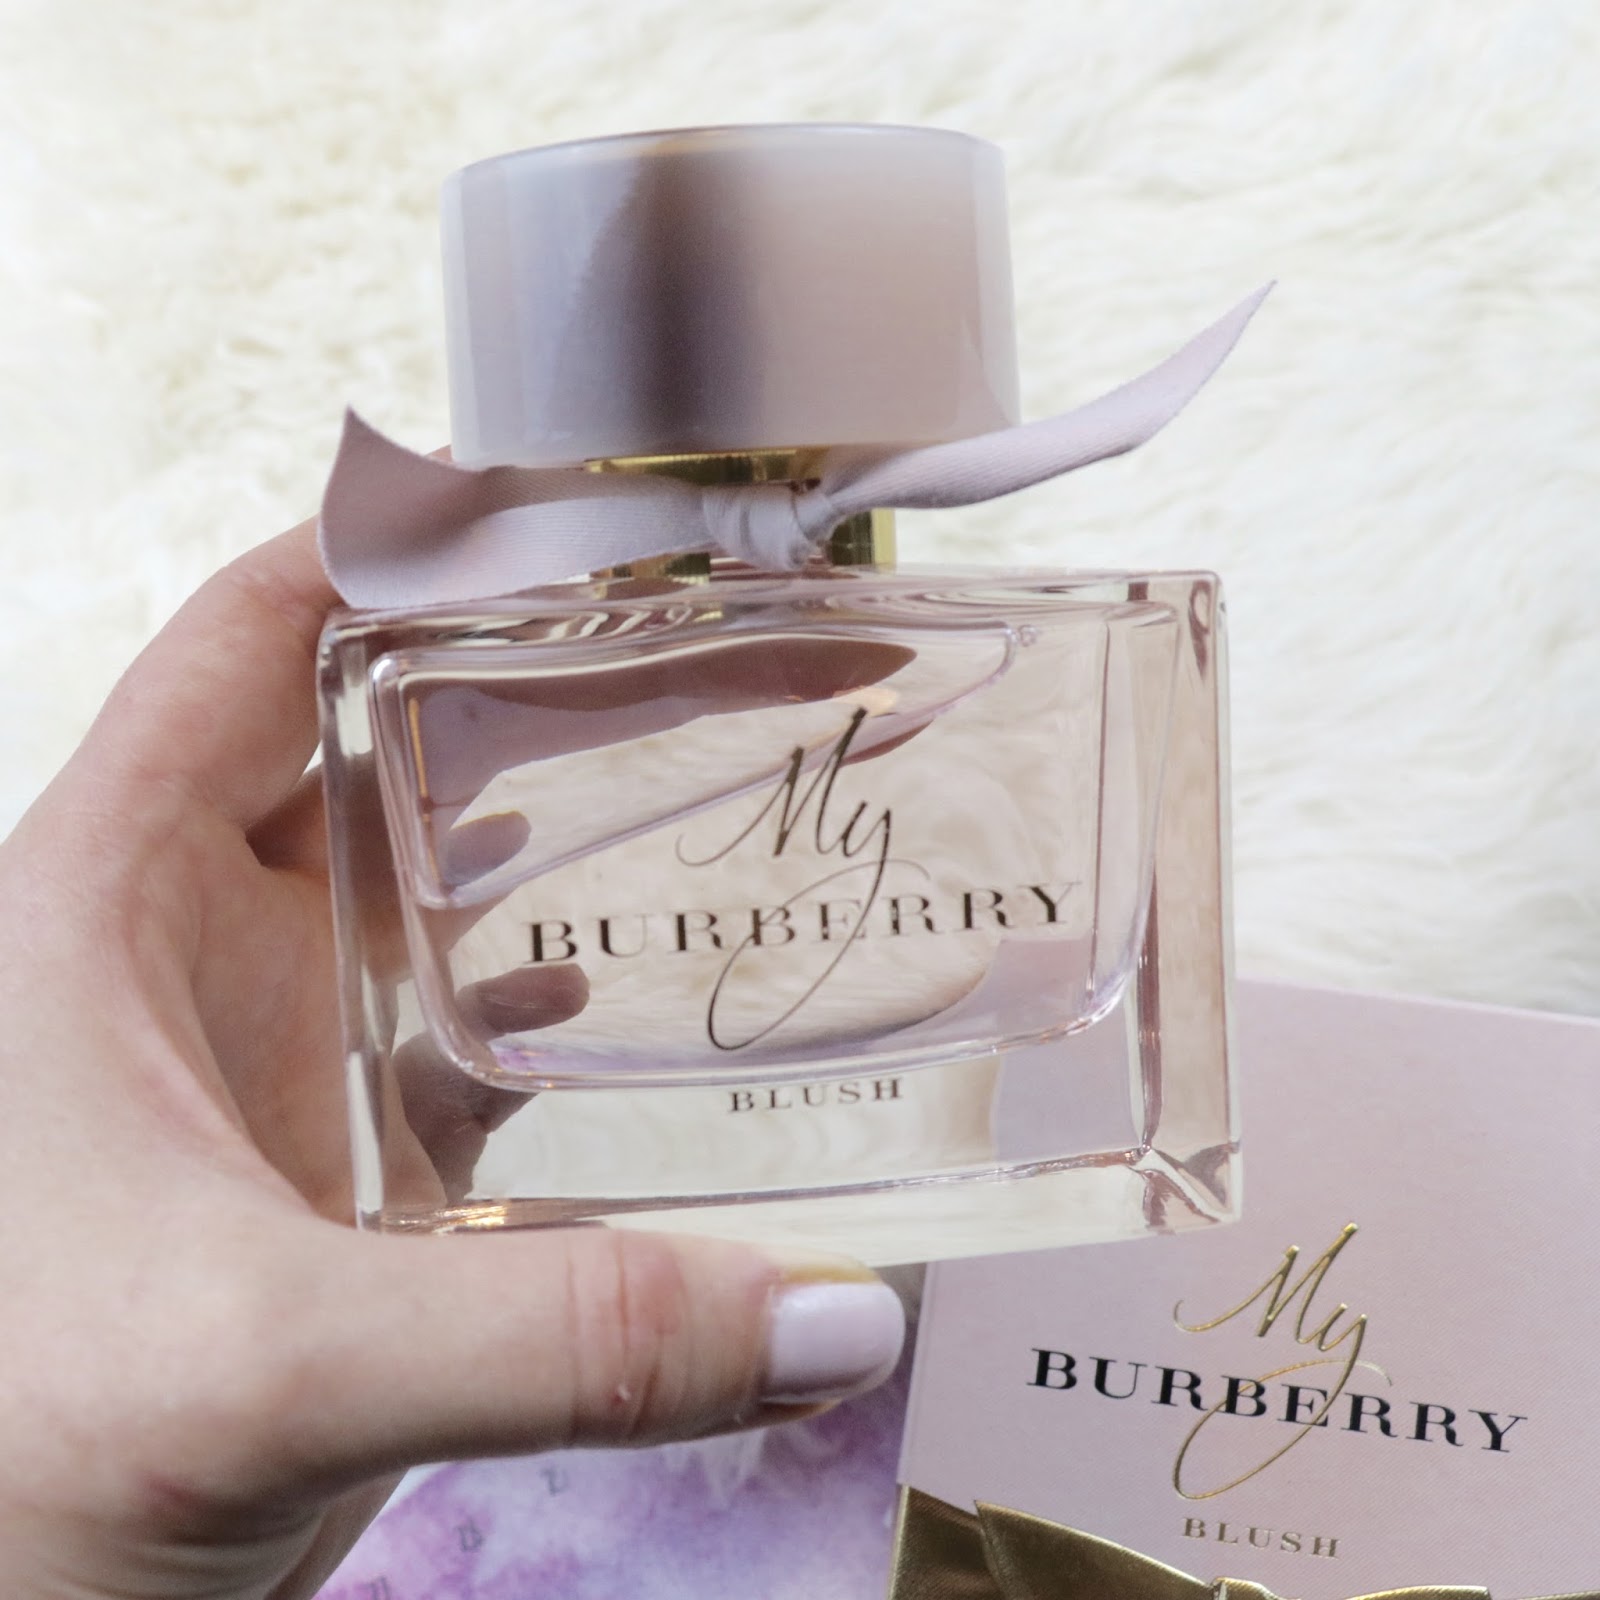 burberry blush review